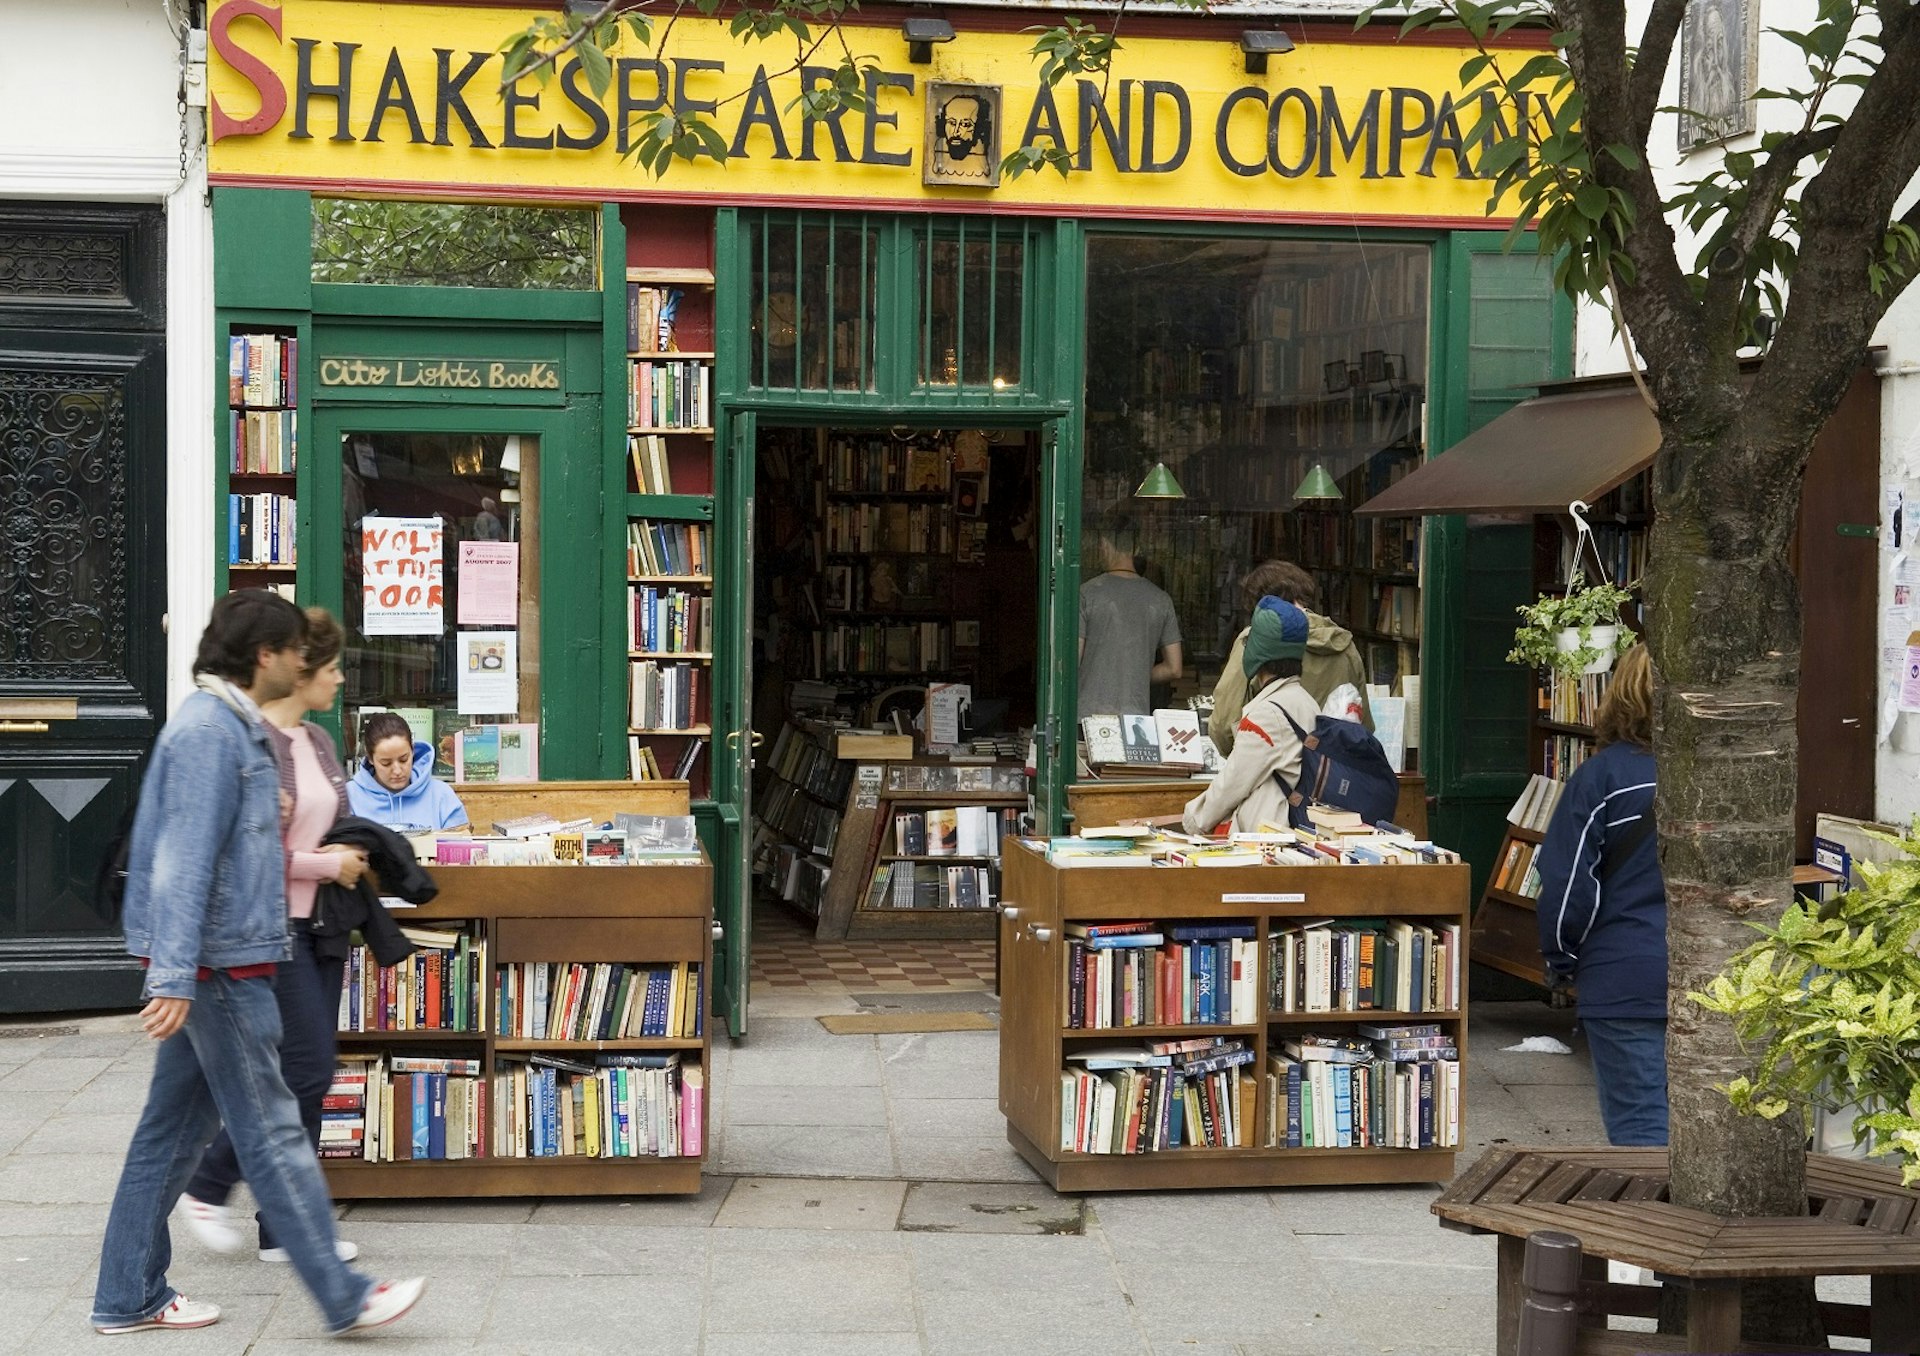 Exterior of the book shop, with several people sat outside reading or browsing the books on display